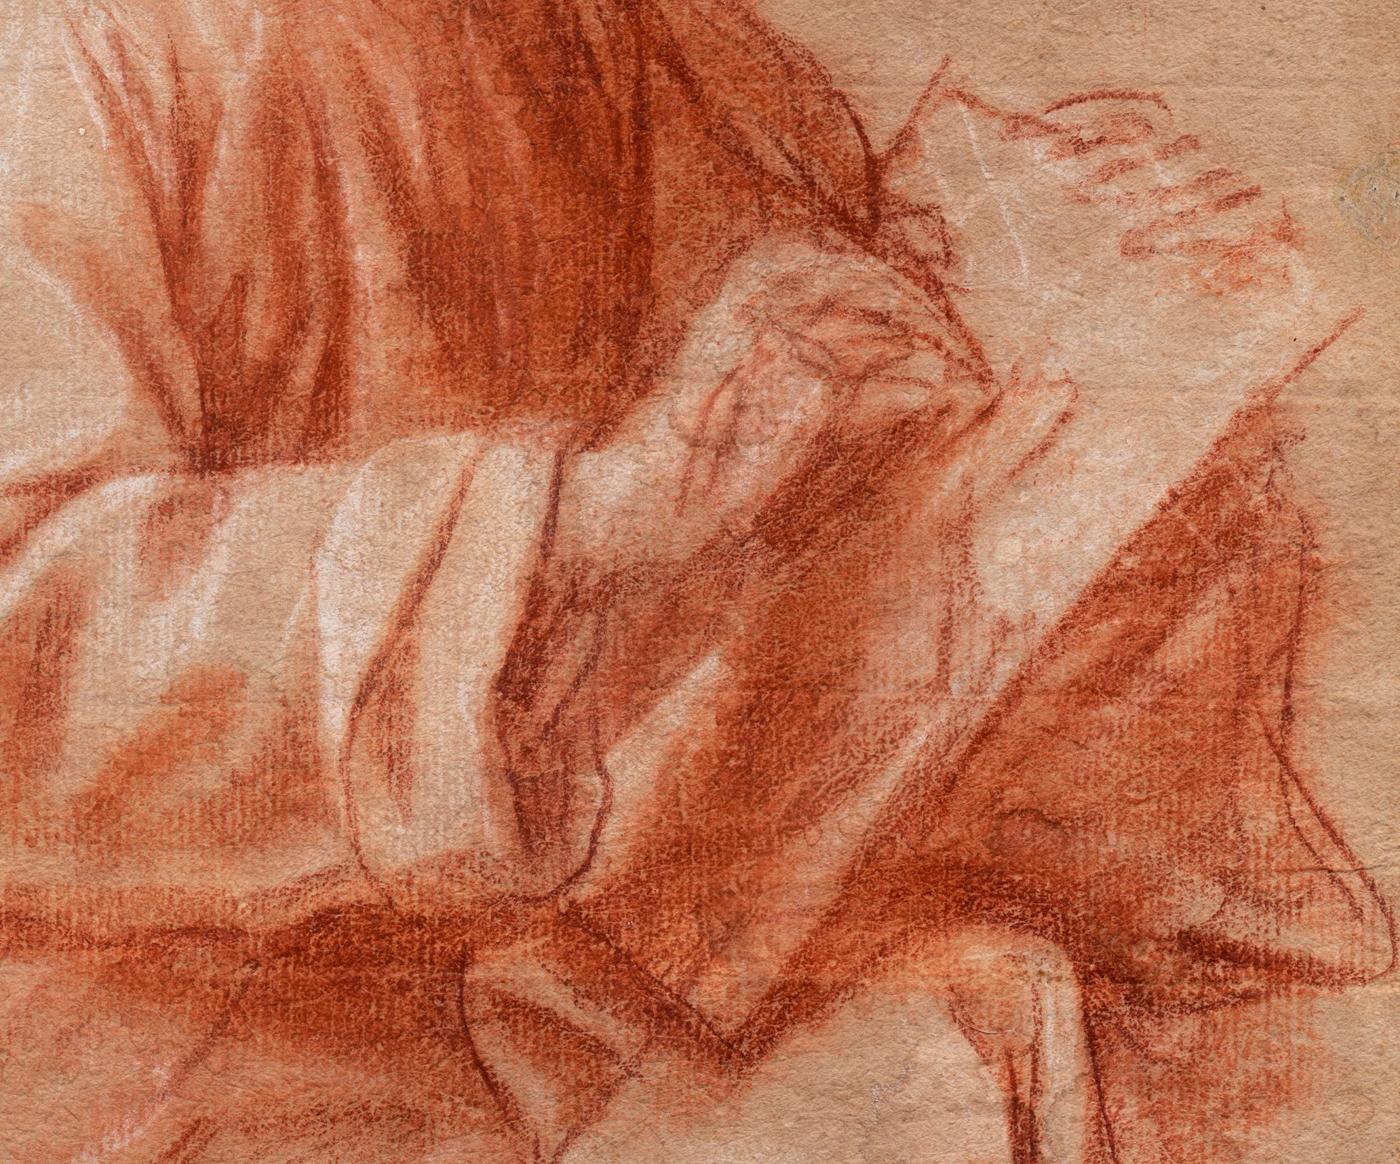 Bartolomeo Schedoni (Formigine, near Modena 1578 – 1615 Parma)

Study of the Evangelist St John

Red chalk, heightened with white chalk, on buff paper, 279 x 219 mm (11 x 8.6 inch)

Provenance
- Alfredo Petrucci (1888–1969), Rome
- Private